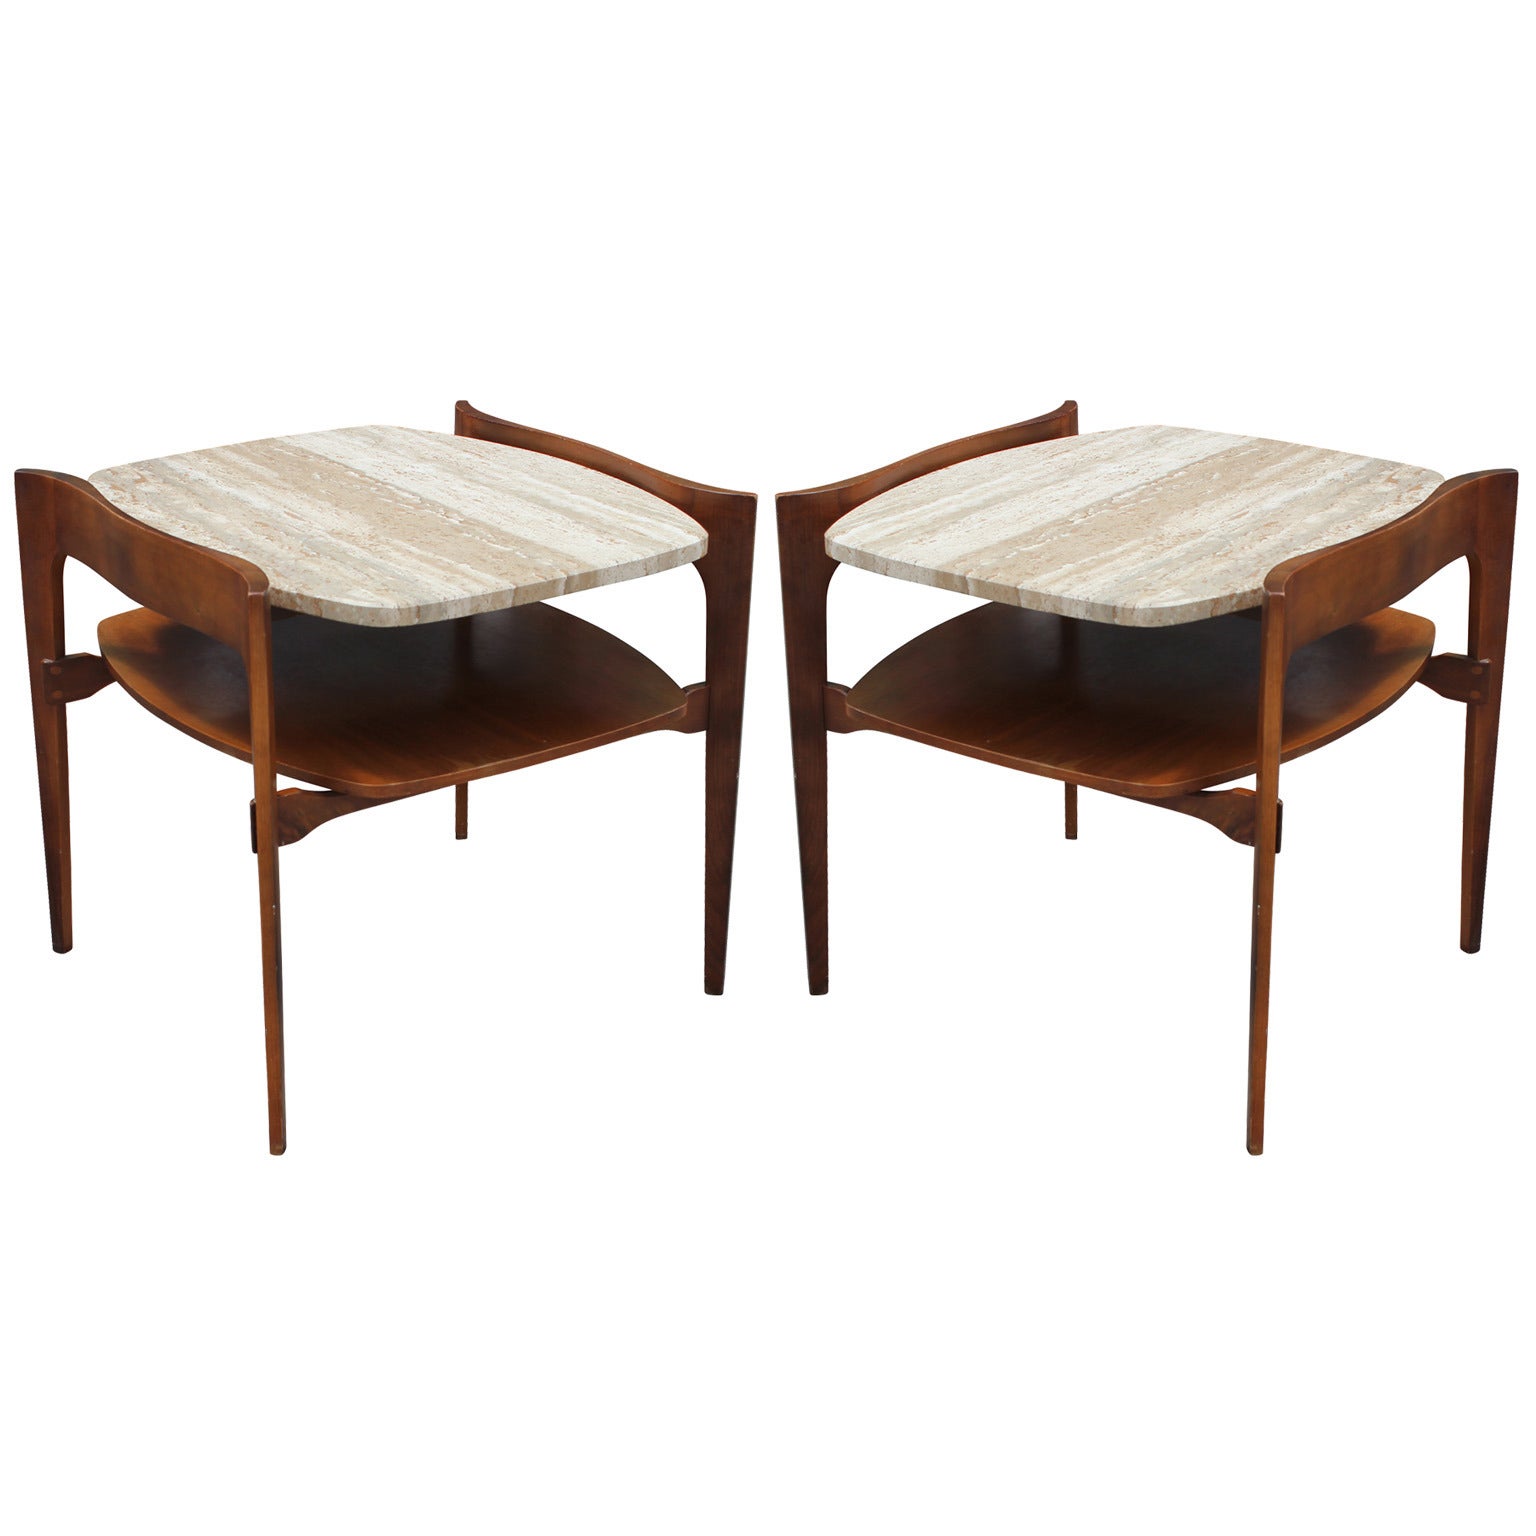 Pair of Travertine Side Tables by Bertha Schaefer